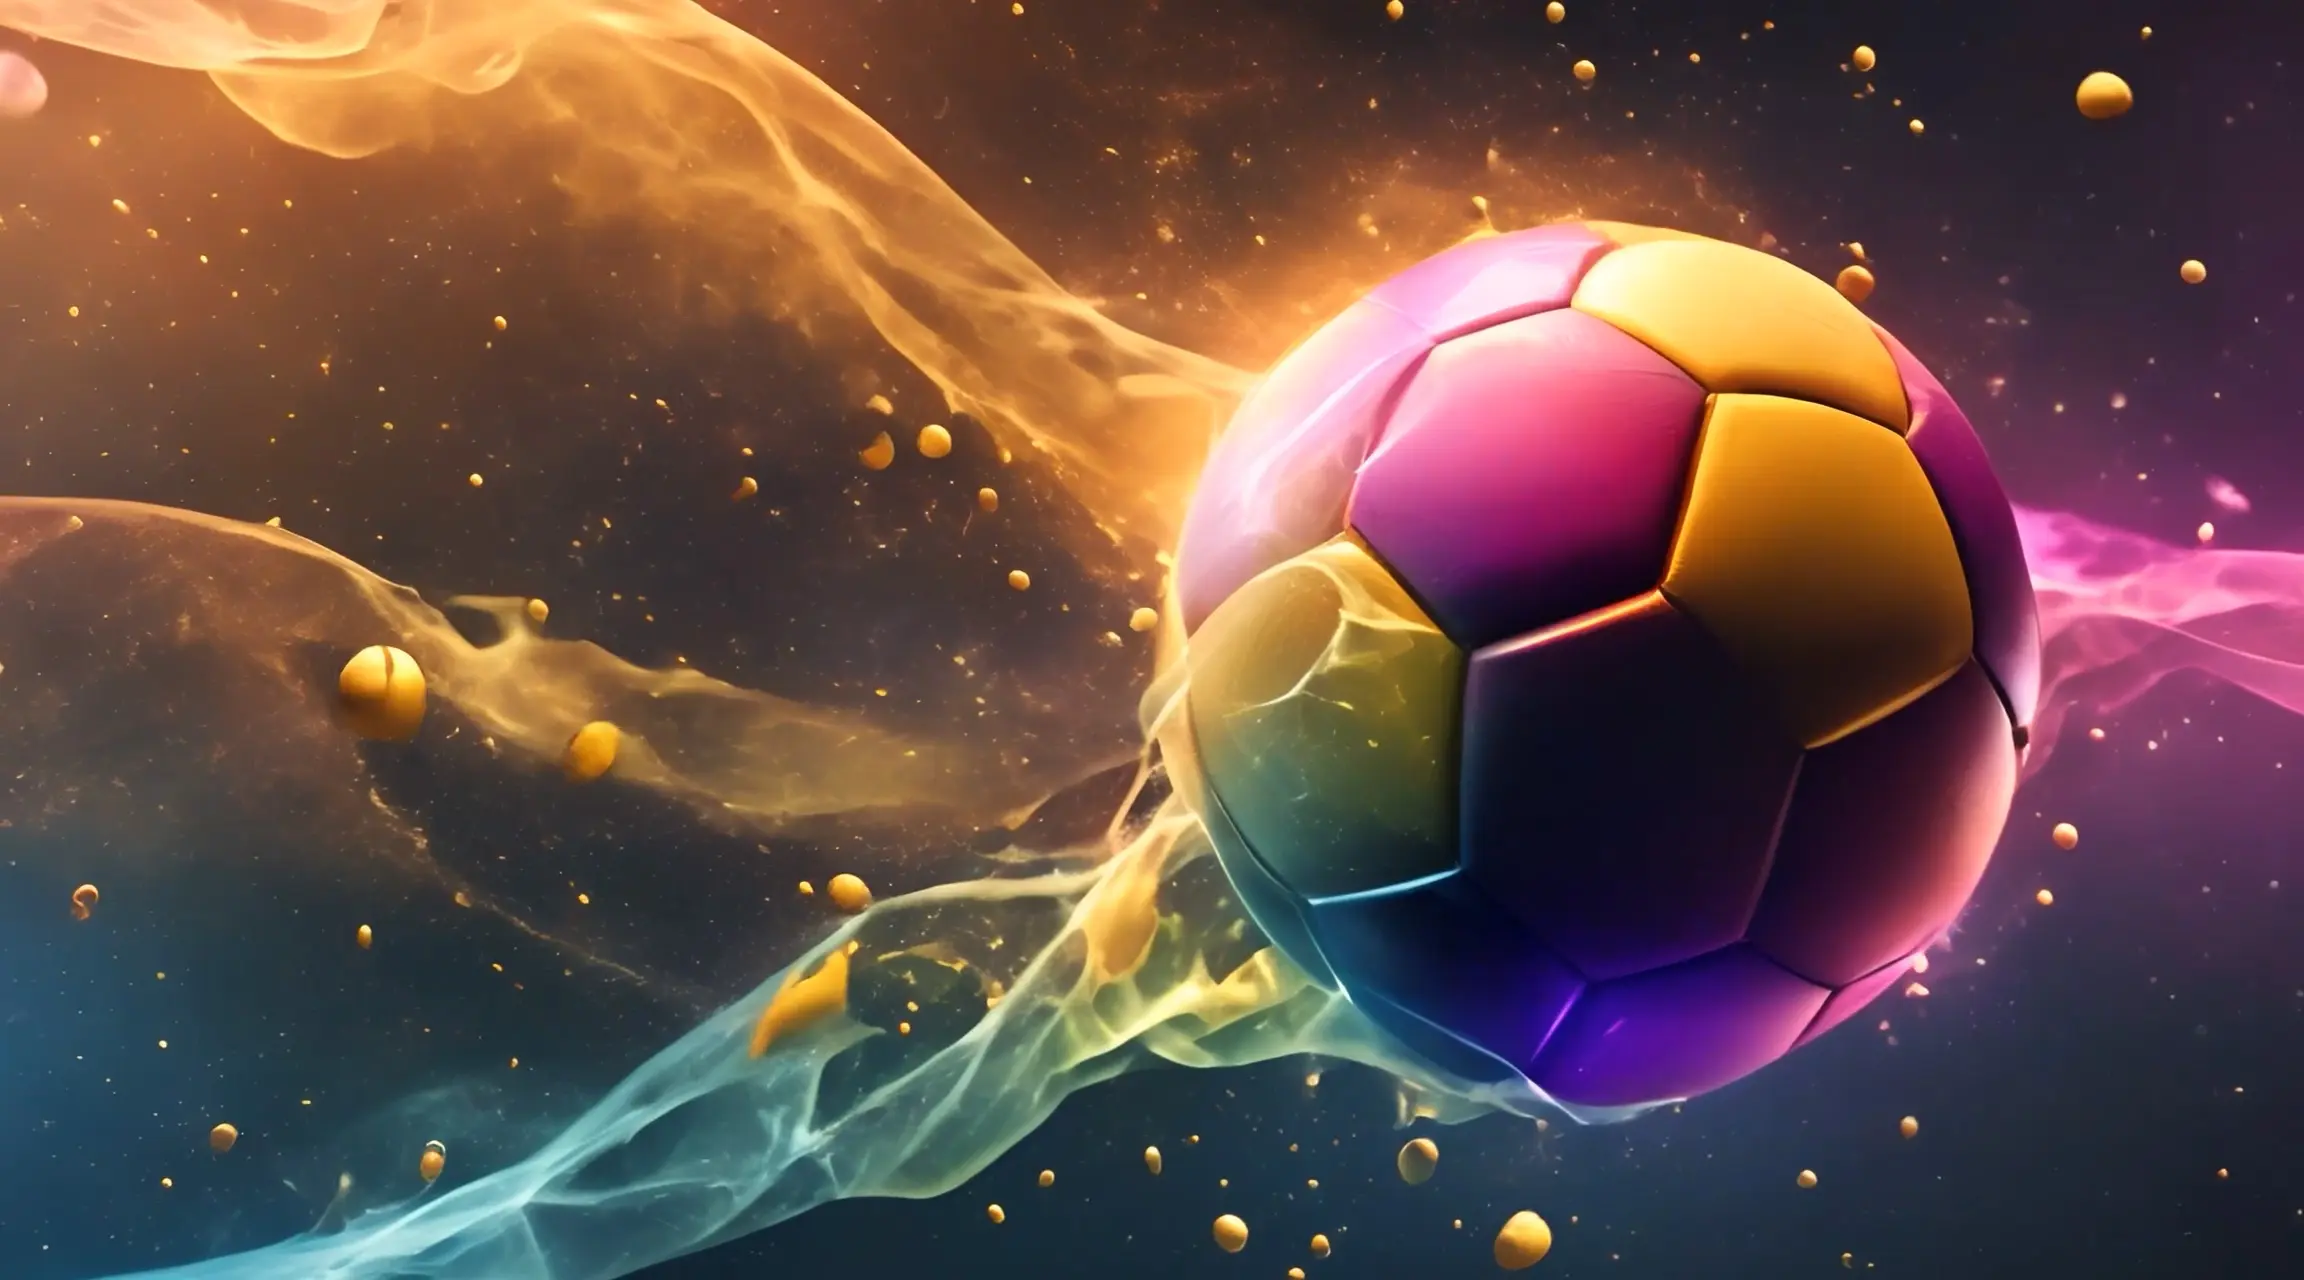 Soccer Sphere with Fiery Aura